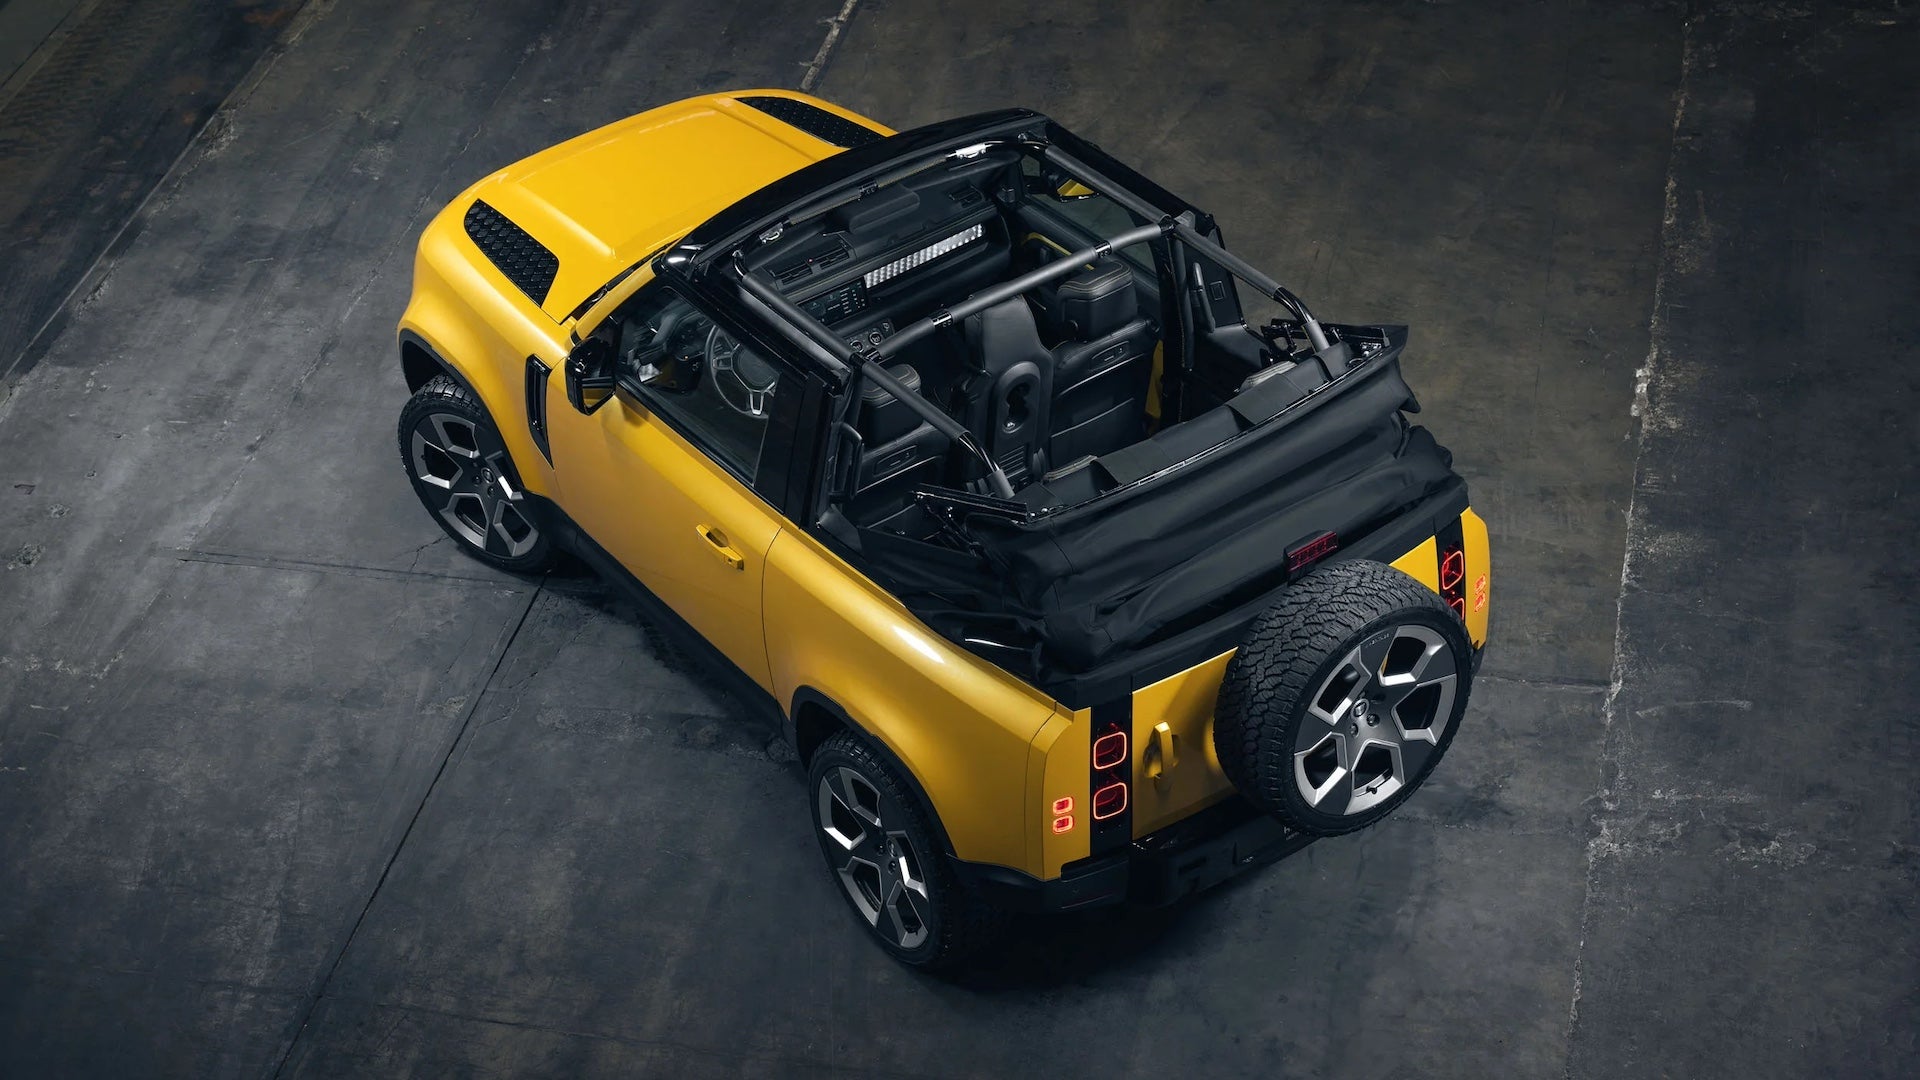 The Land Rover Defender now comes with an electric convertible roof, specifically designed for optimal performance in rugged off-road conditions.